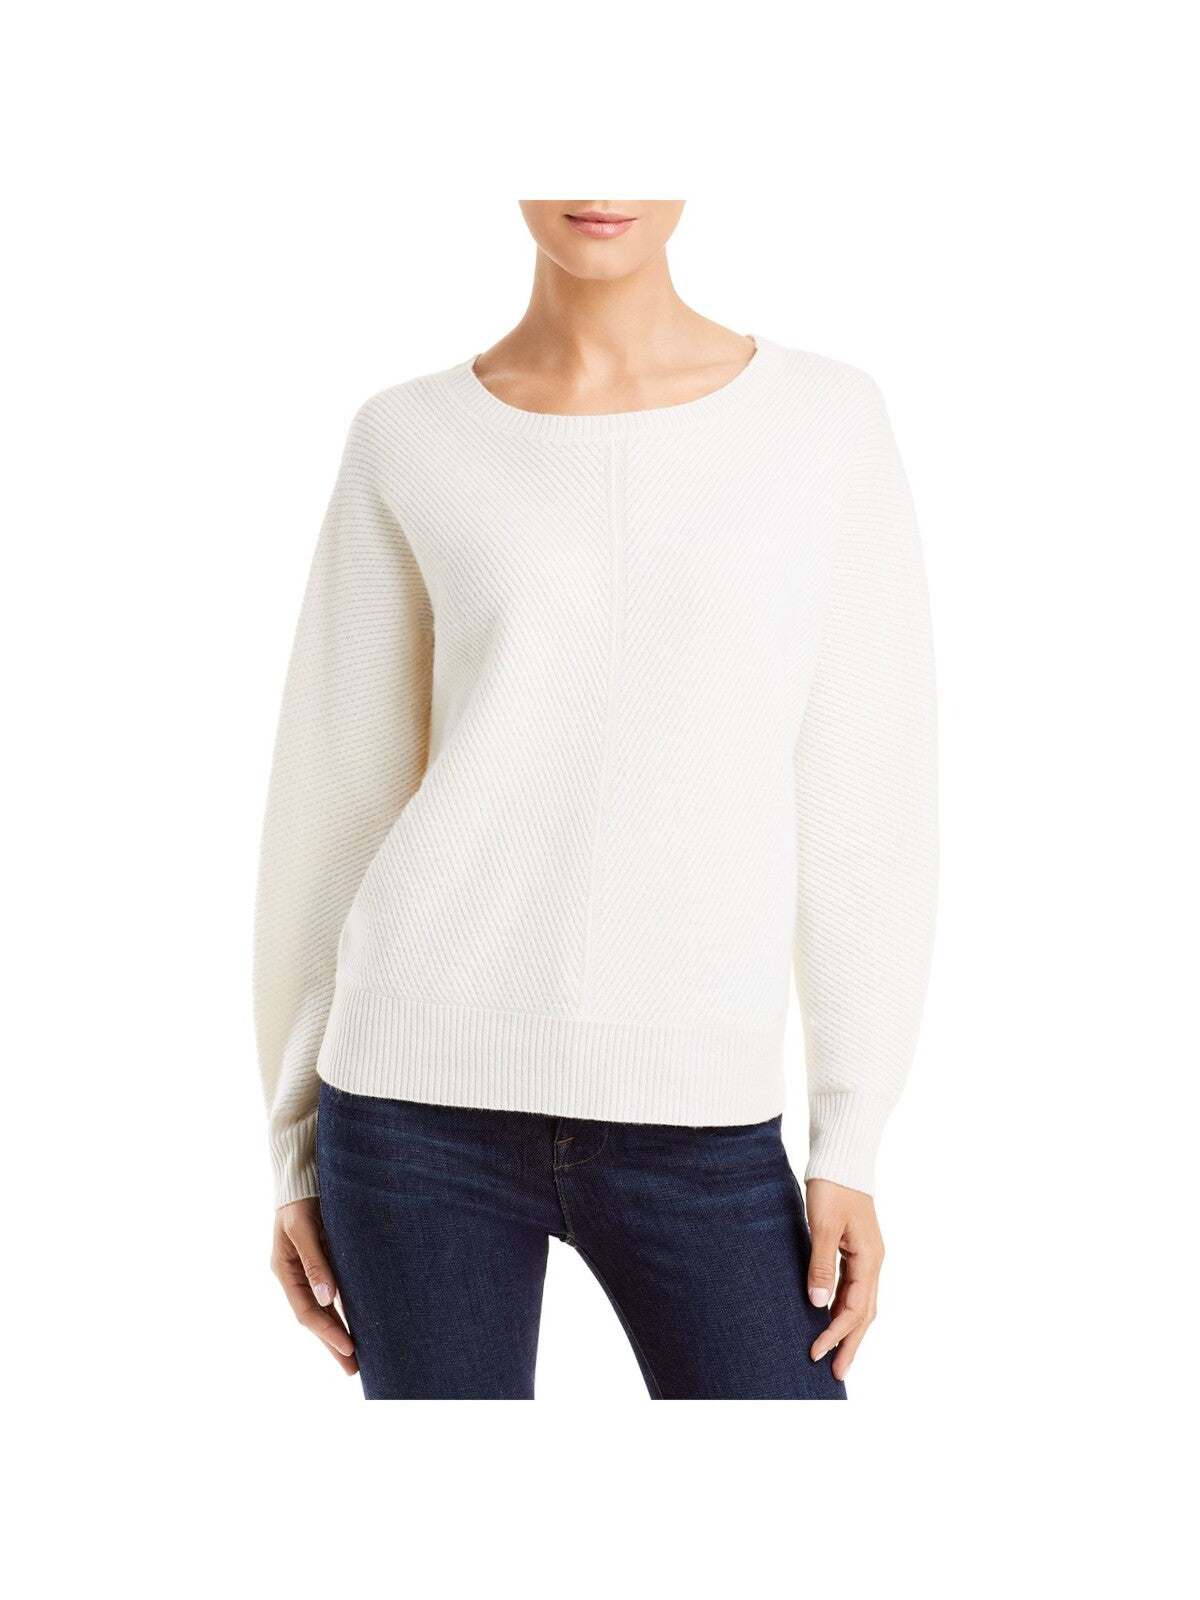 C.CASHMERE Womens White Ribbed Textured Novelty Stitch Long Sleeve Scoop Neck Sweater XL